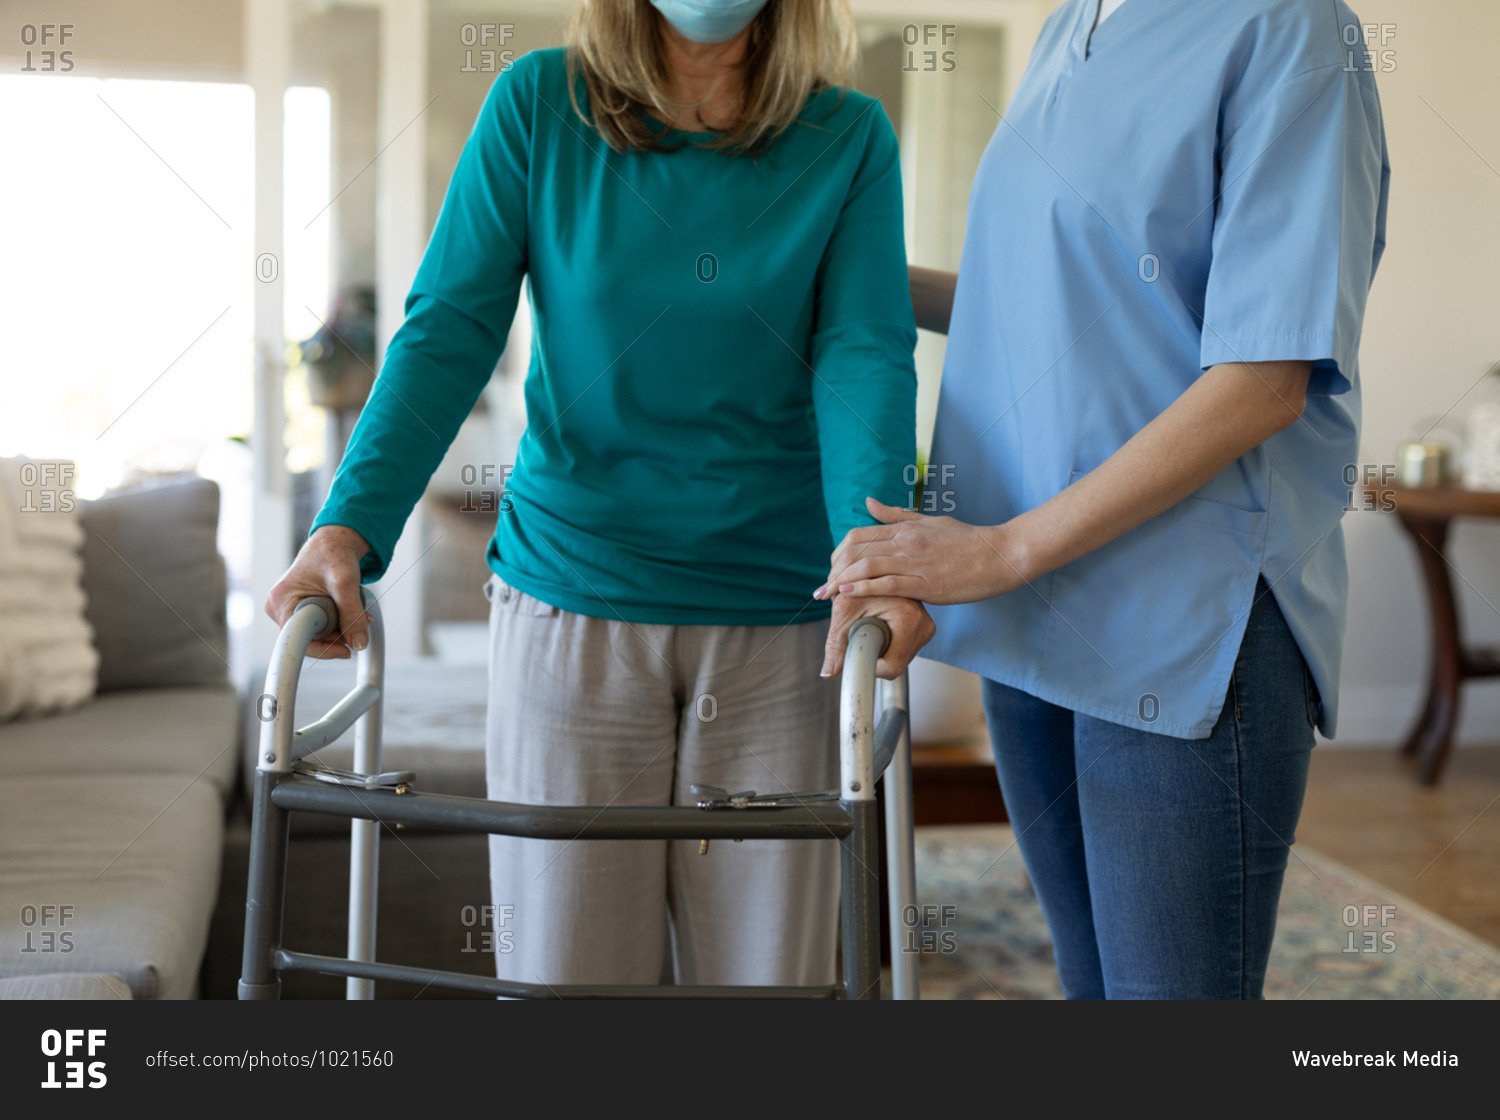 Senior Caucasian woman at home visited by Caucasian female nurse, walking using a walker, wearing face mask. Medical care at home during Covid 19 Coronavirus quarantine.